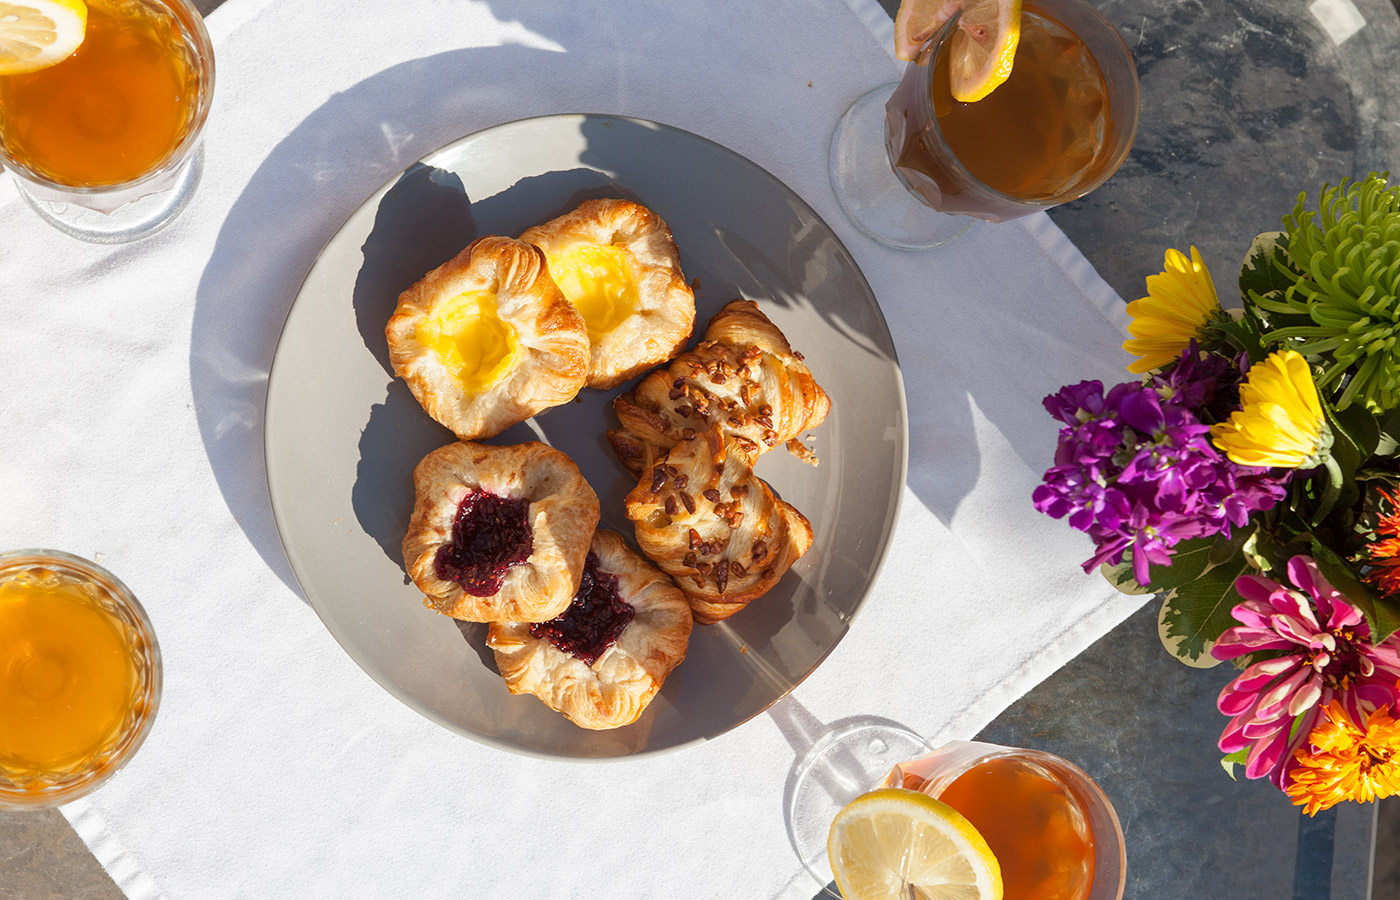 Drinks and pastries on a table.